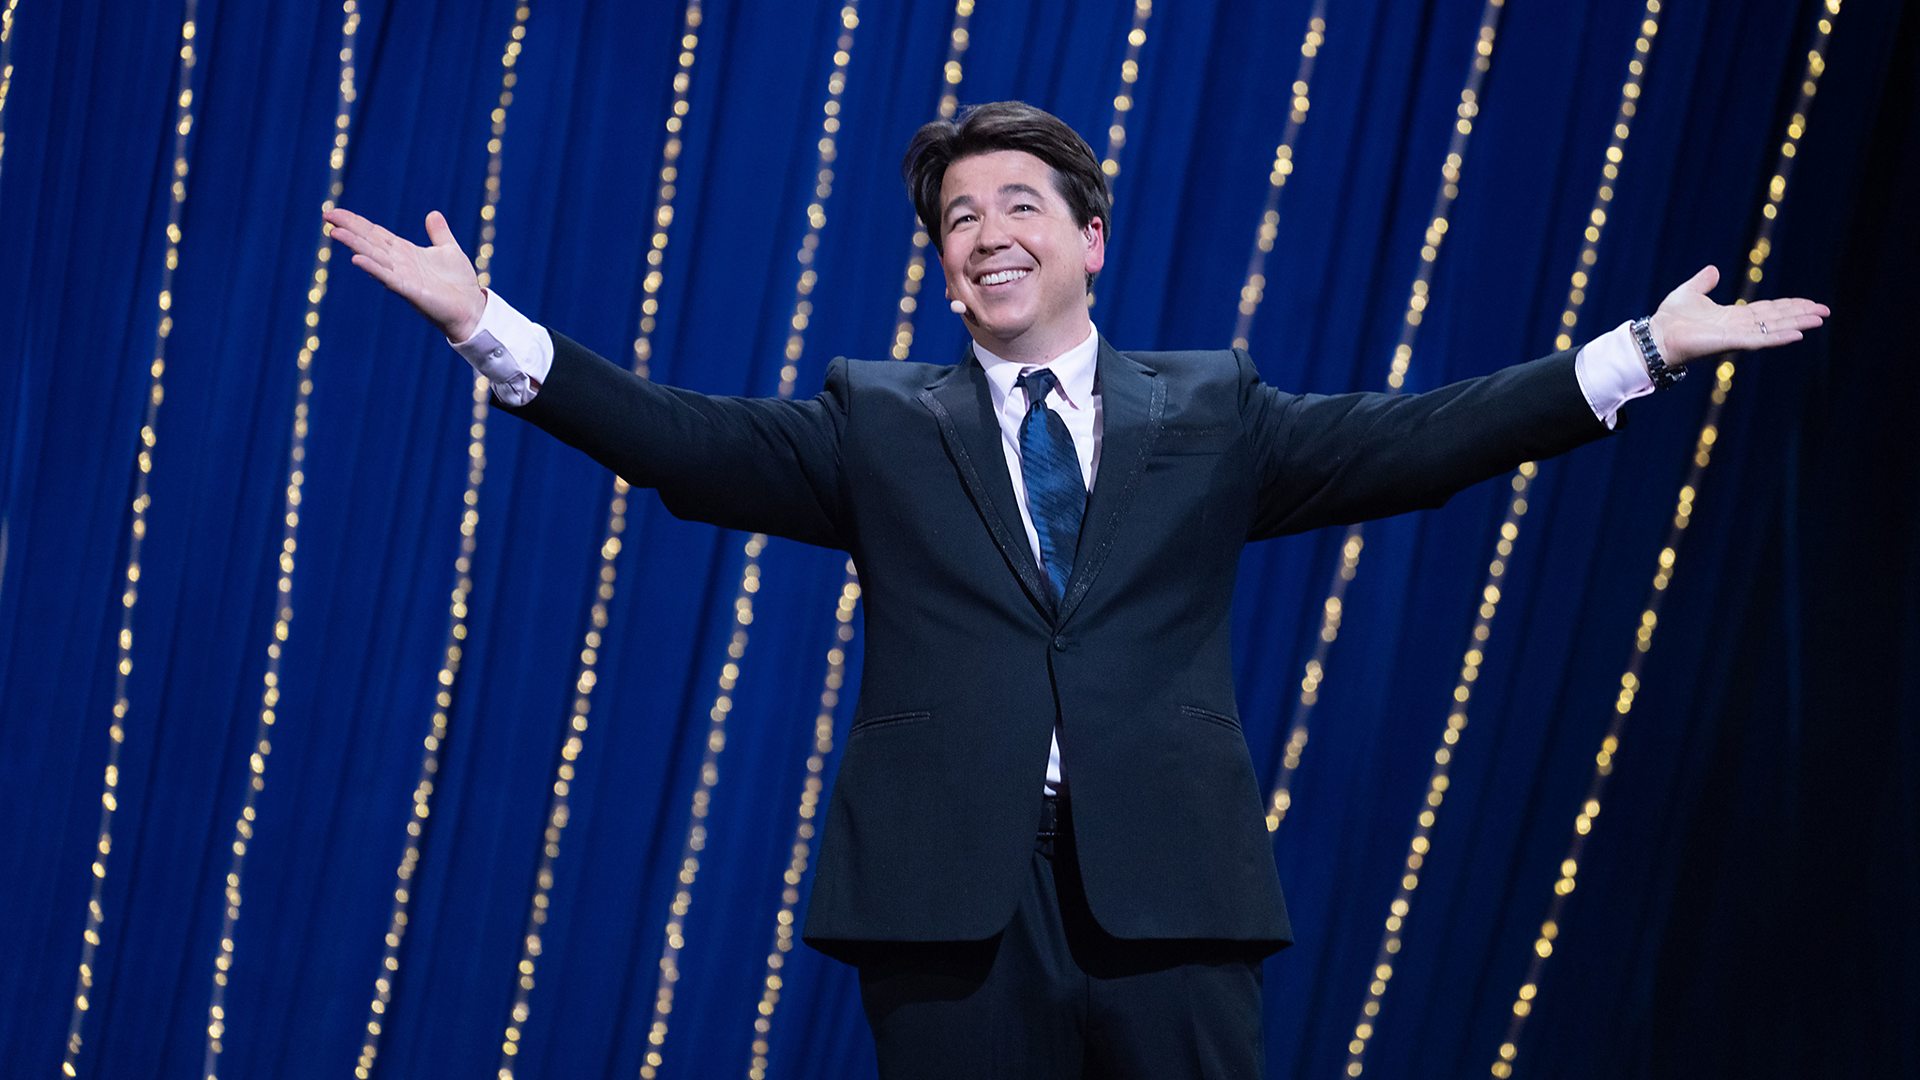 Michael McIntyre reveals who's playing Send to All and Midnight